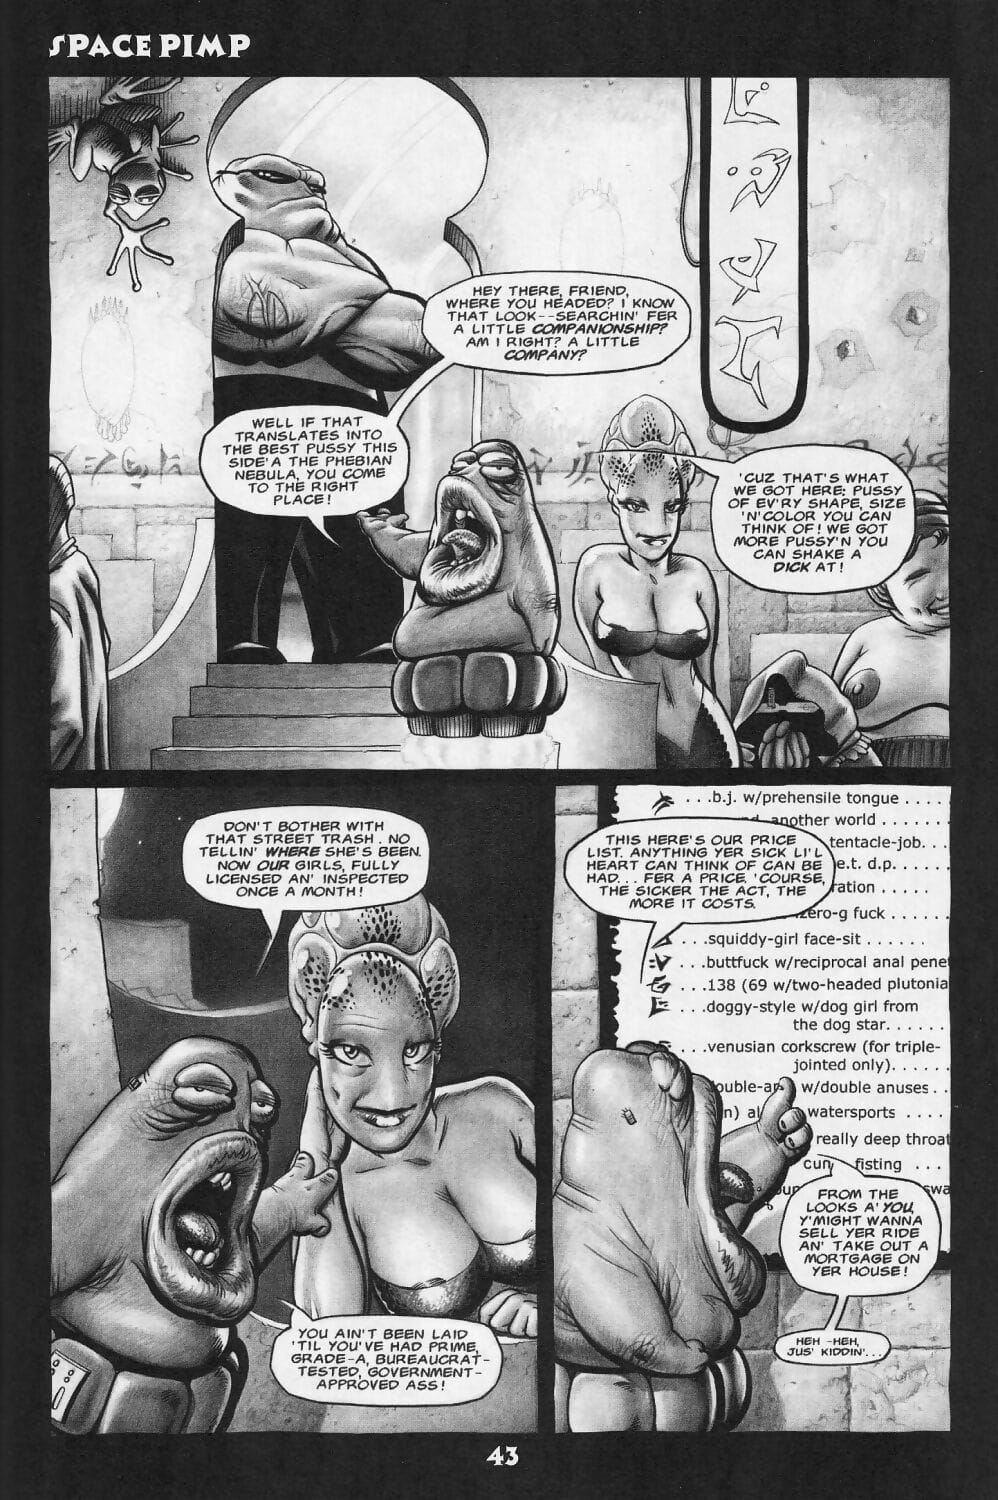 Short Strokes #2 - part 2 page 1